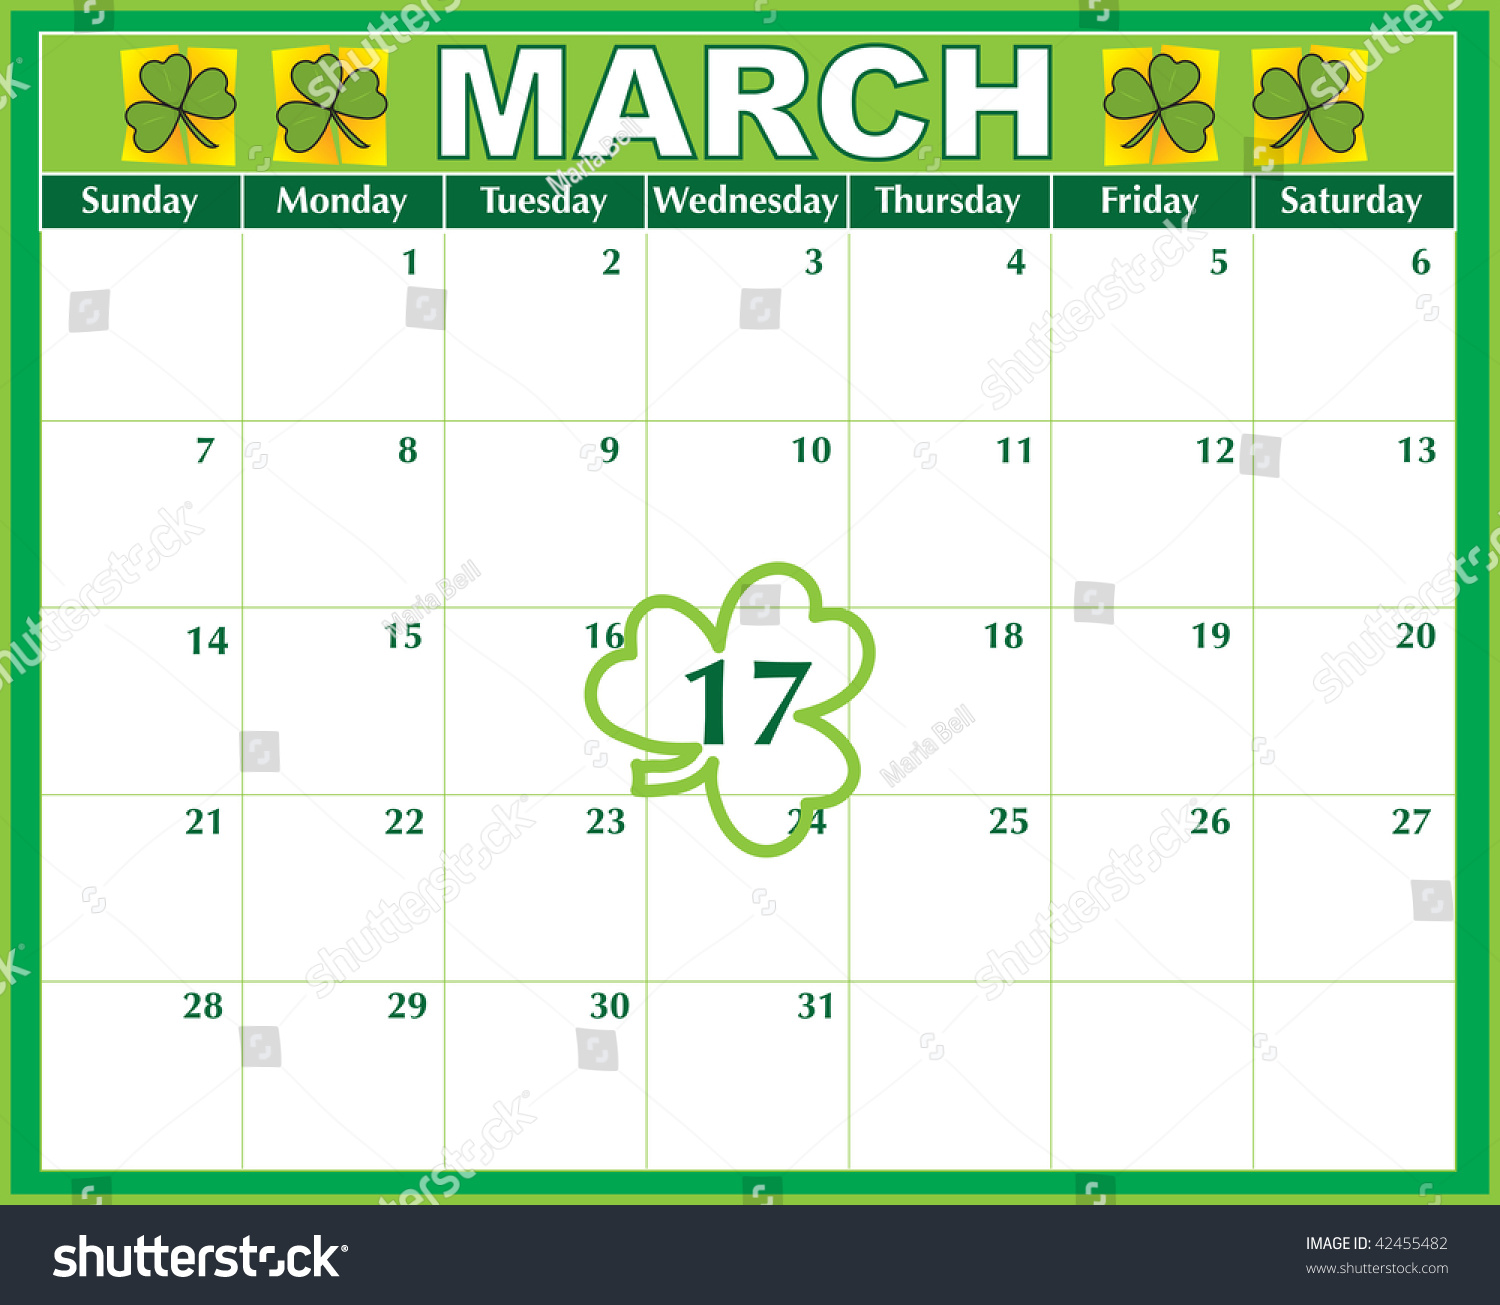 A March Calendar Showing The St. Patrick'S Day Marked Prominently Stock